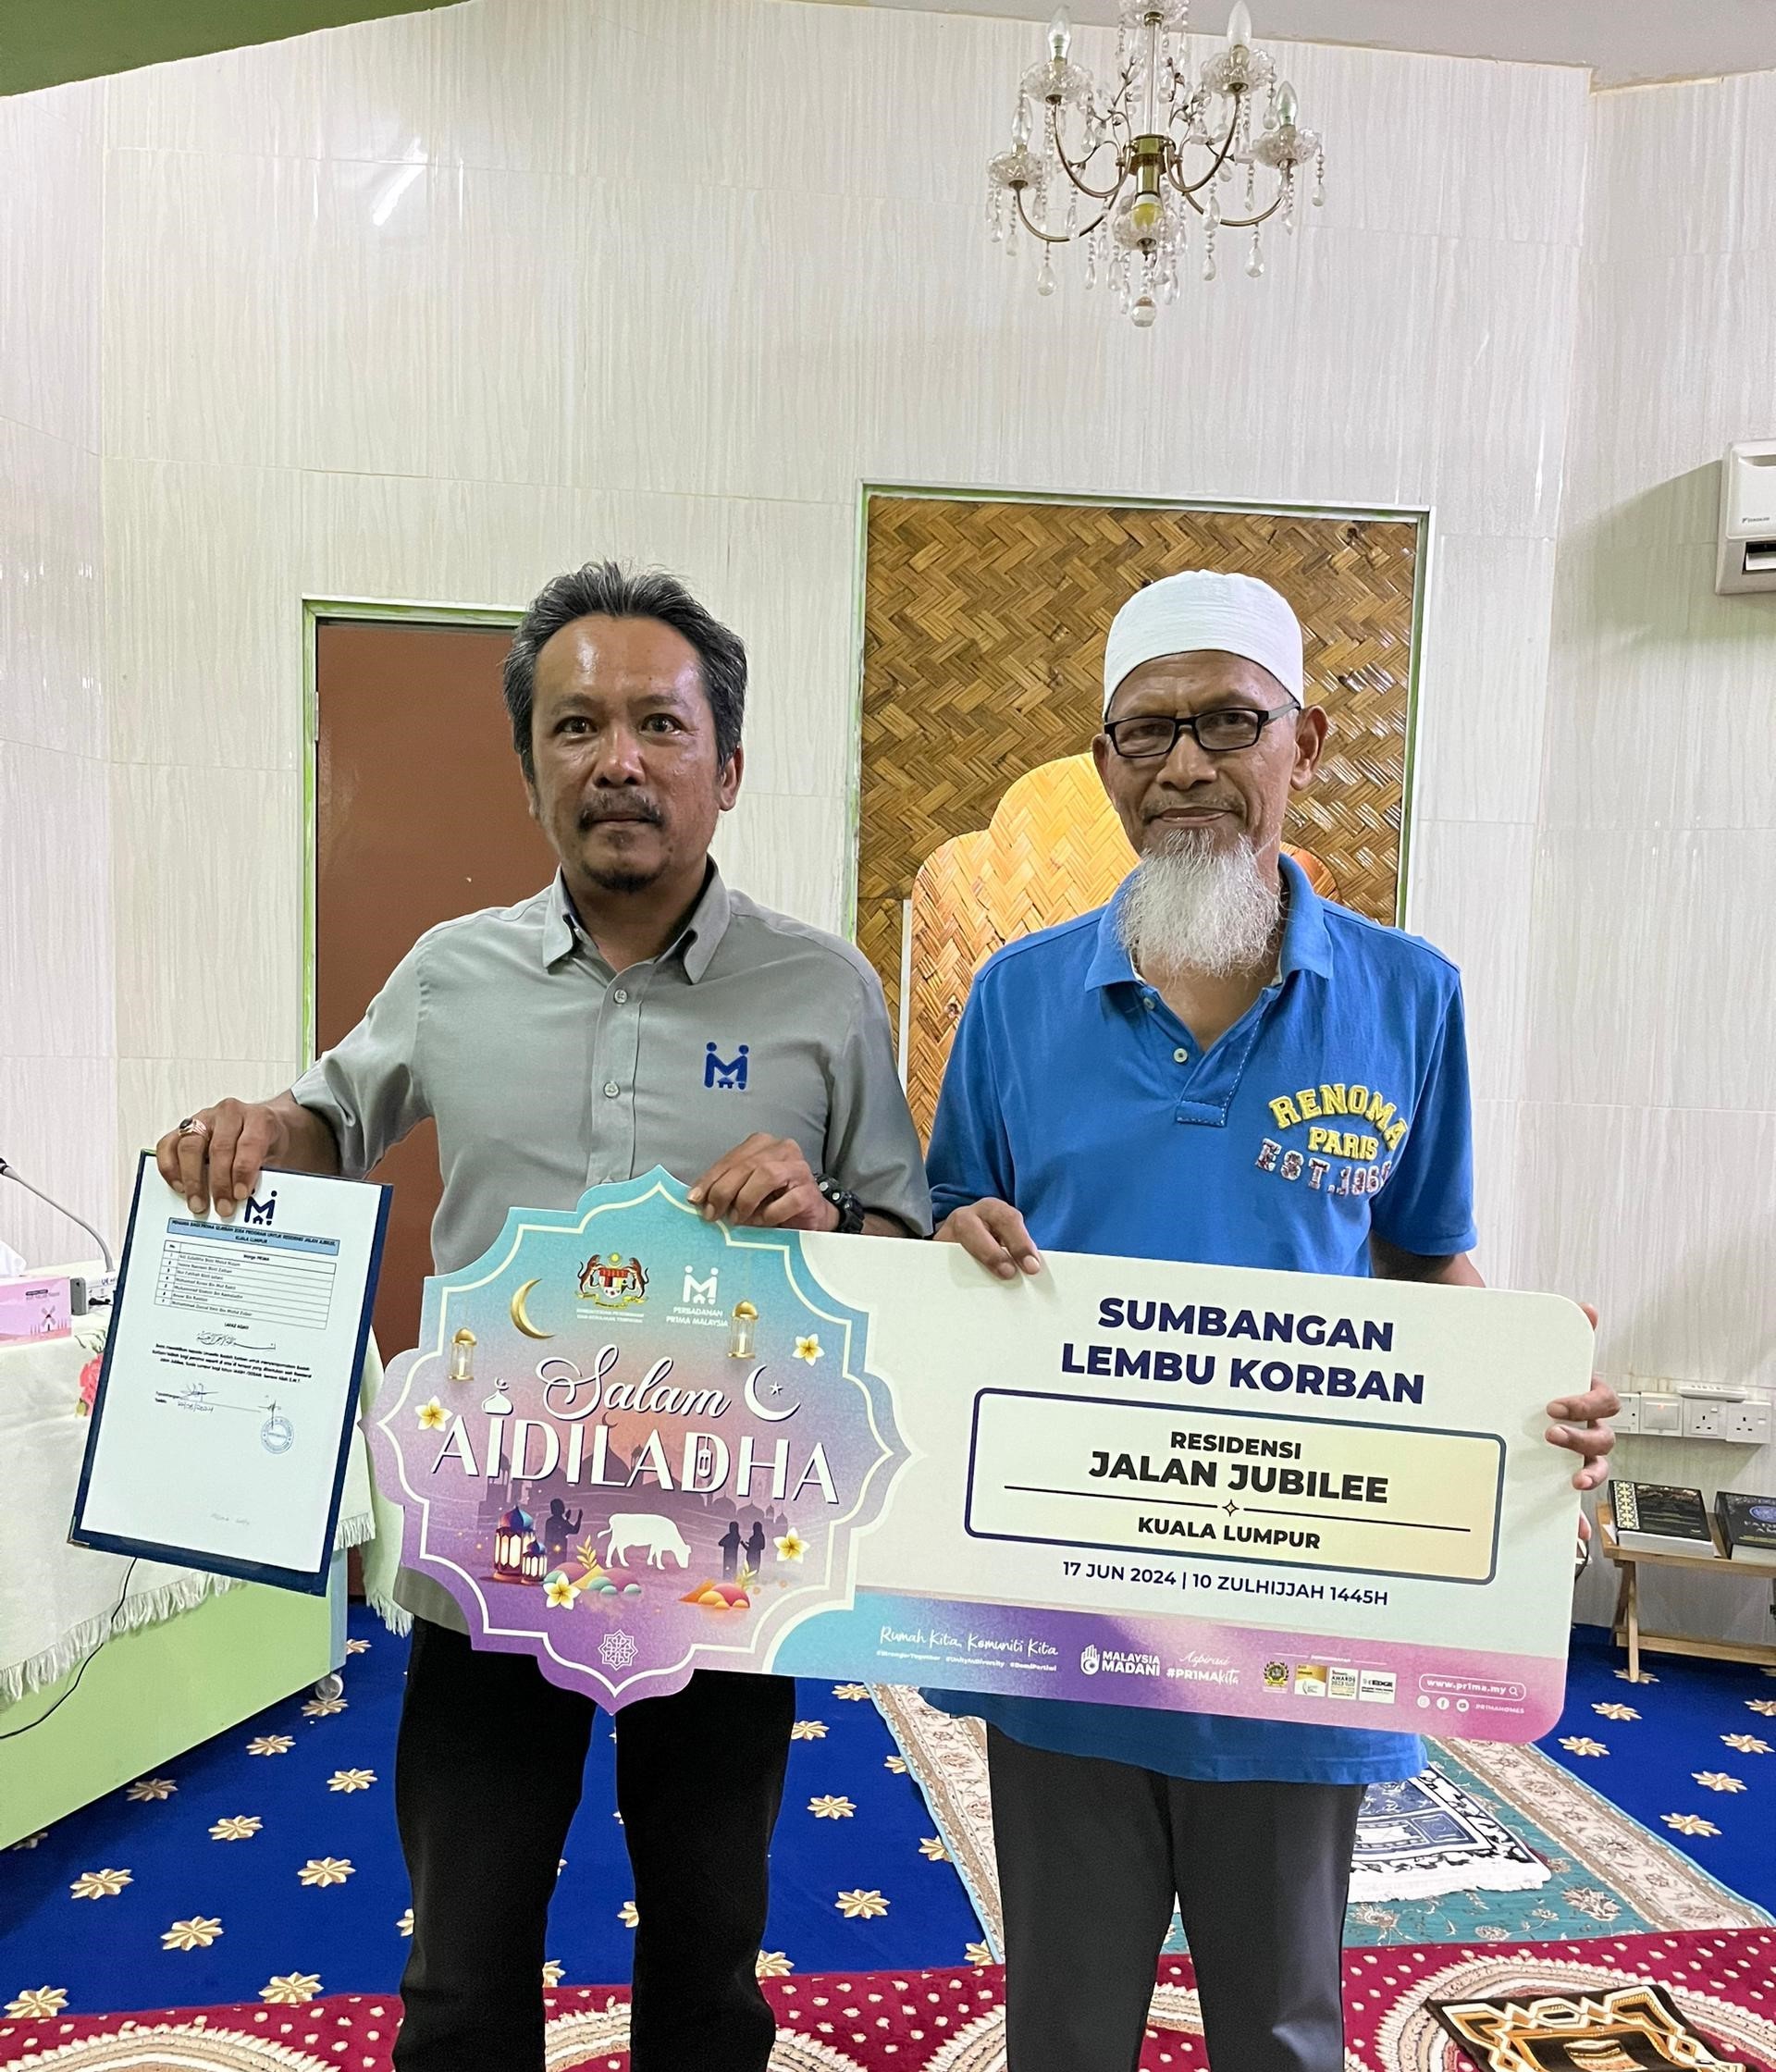 Cover image of Community Past Program: PR1MA Qurban 2024 – Contribution and sponsorships of cows which in line with the #PR1MAKita Aspiration at Residensi Jalan Jubilee, Kuala Lumpur.